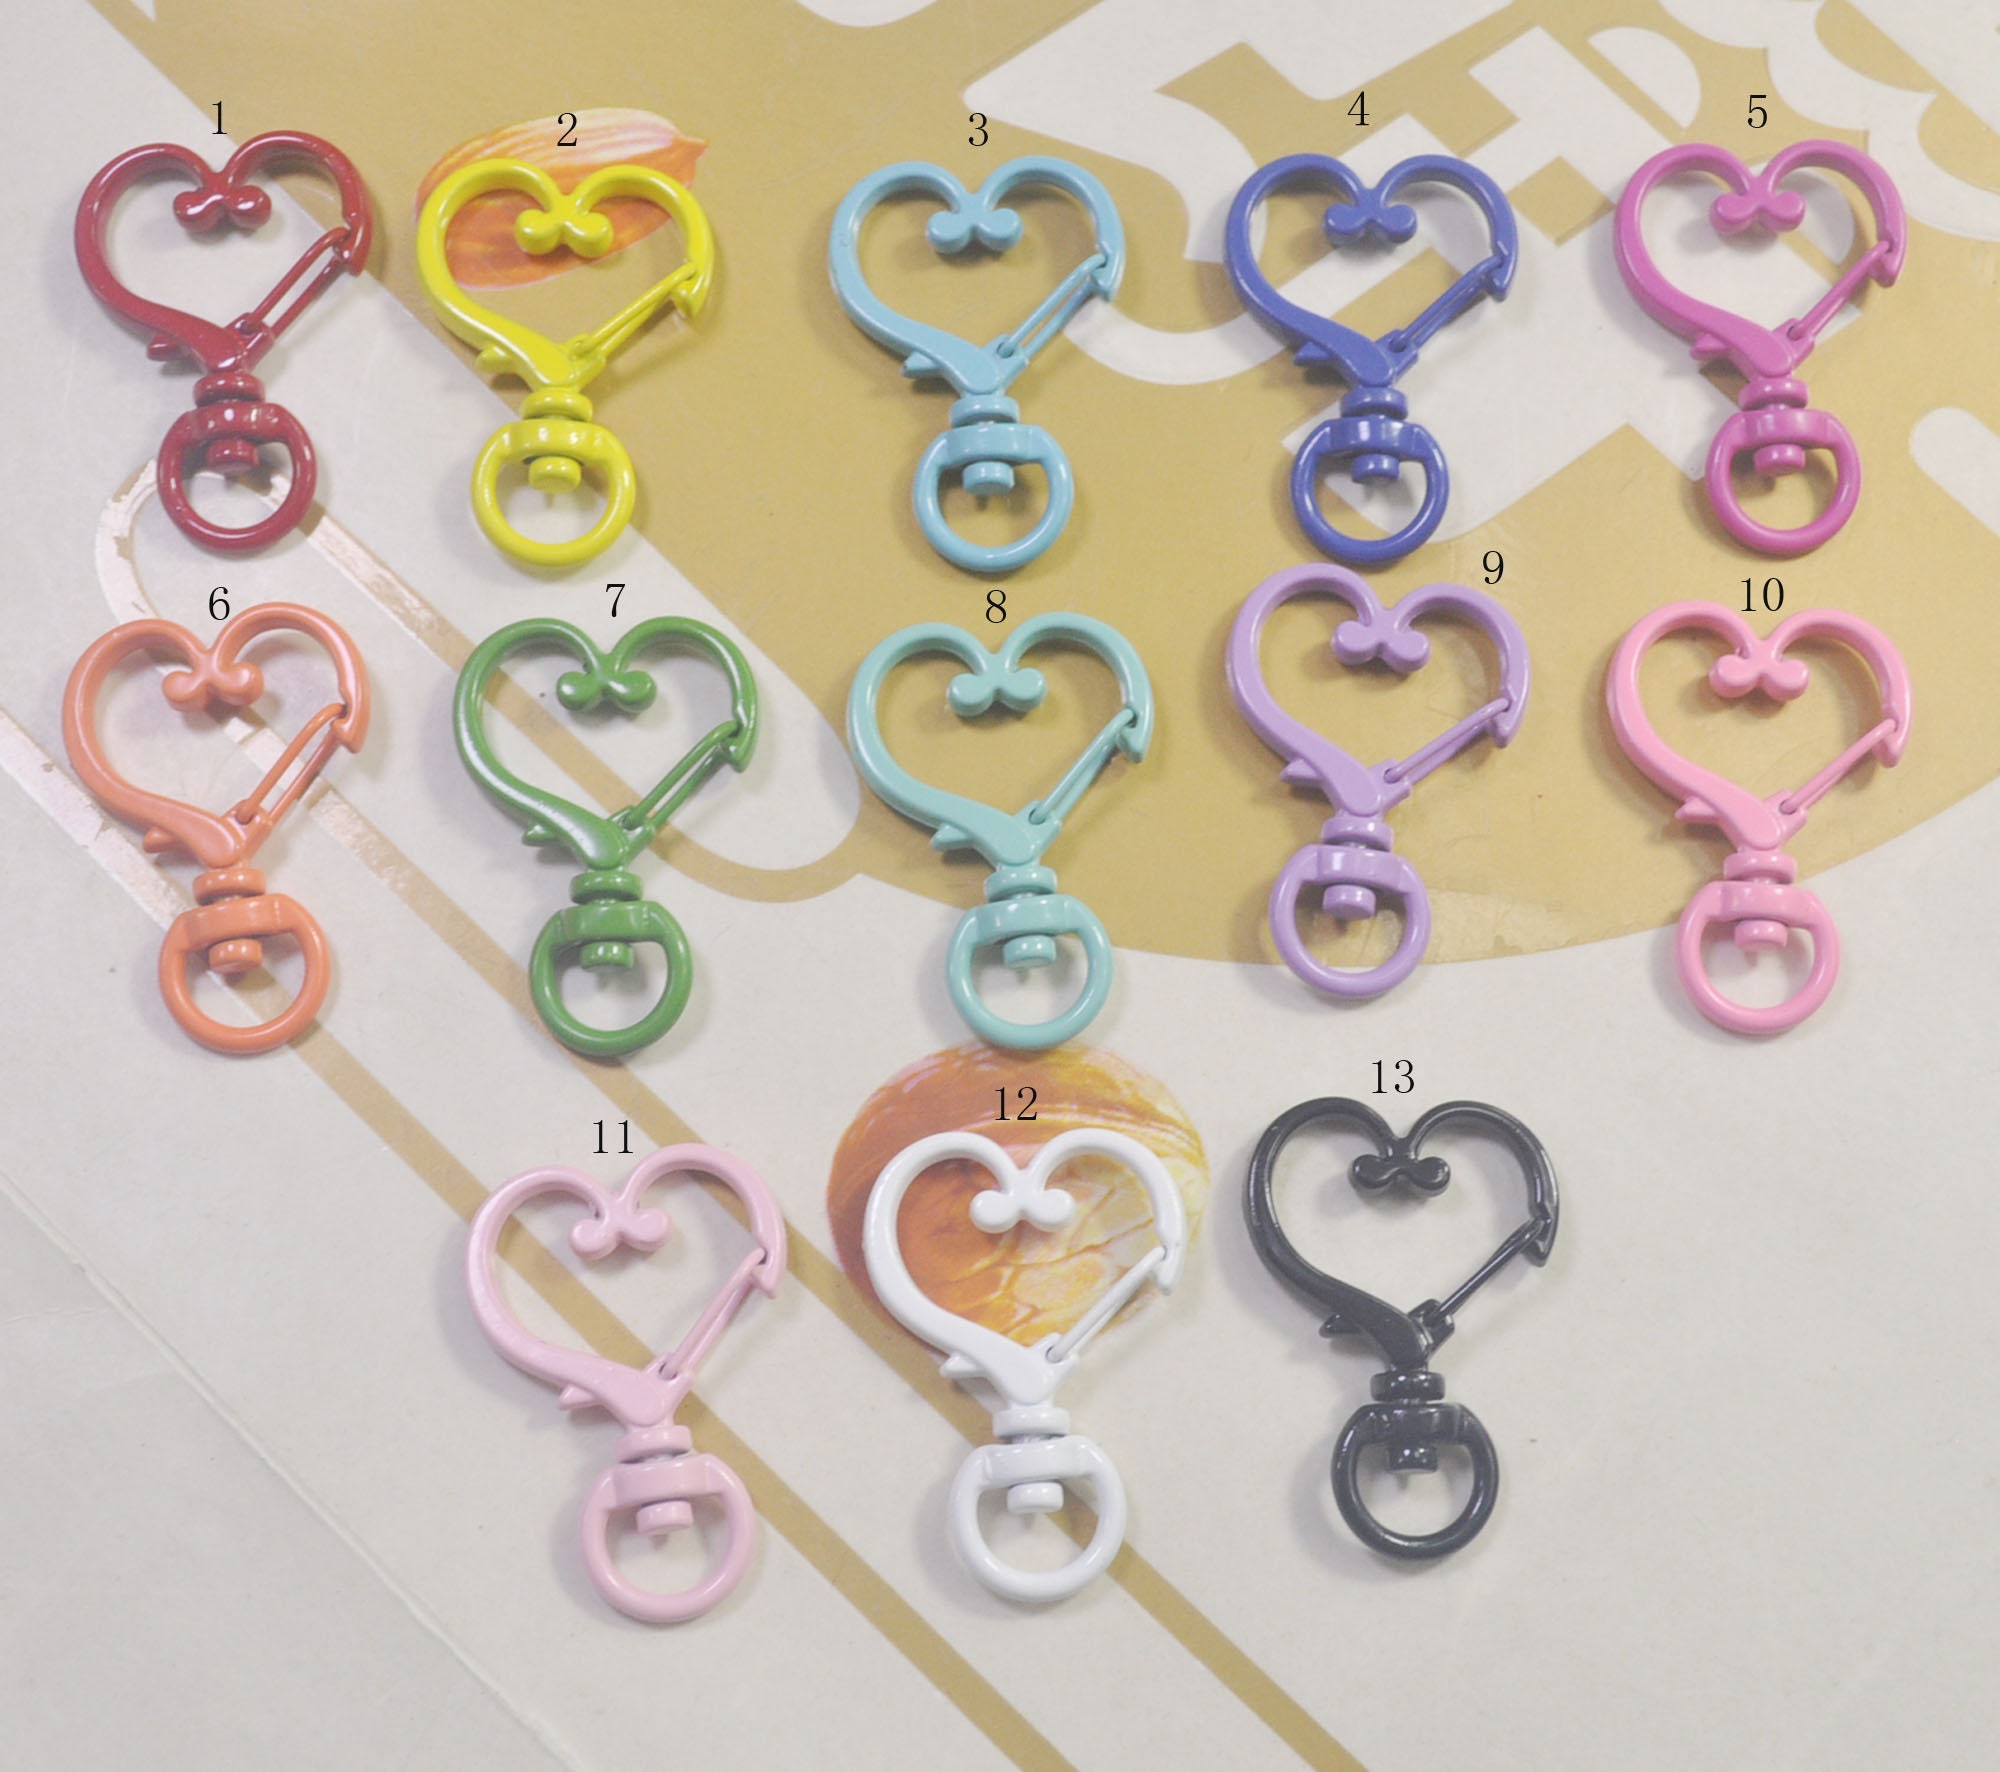 Round Heart Amalgam Alloy Charm Components For DIY Jewelry Making Strong  Magnetic Lobster Clasps, Bracelets, Buckles, Hooks, And Balls From  Carshop2006, $4.39